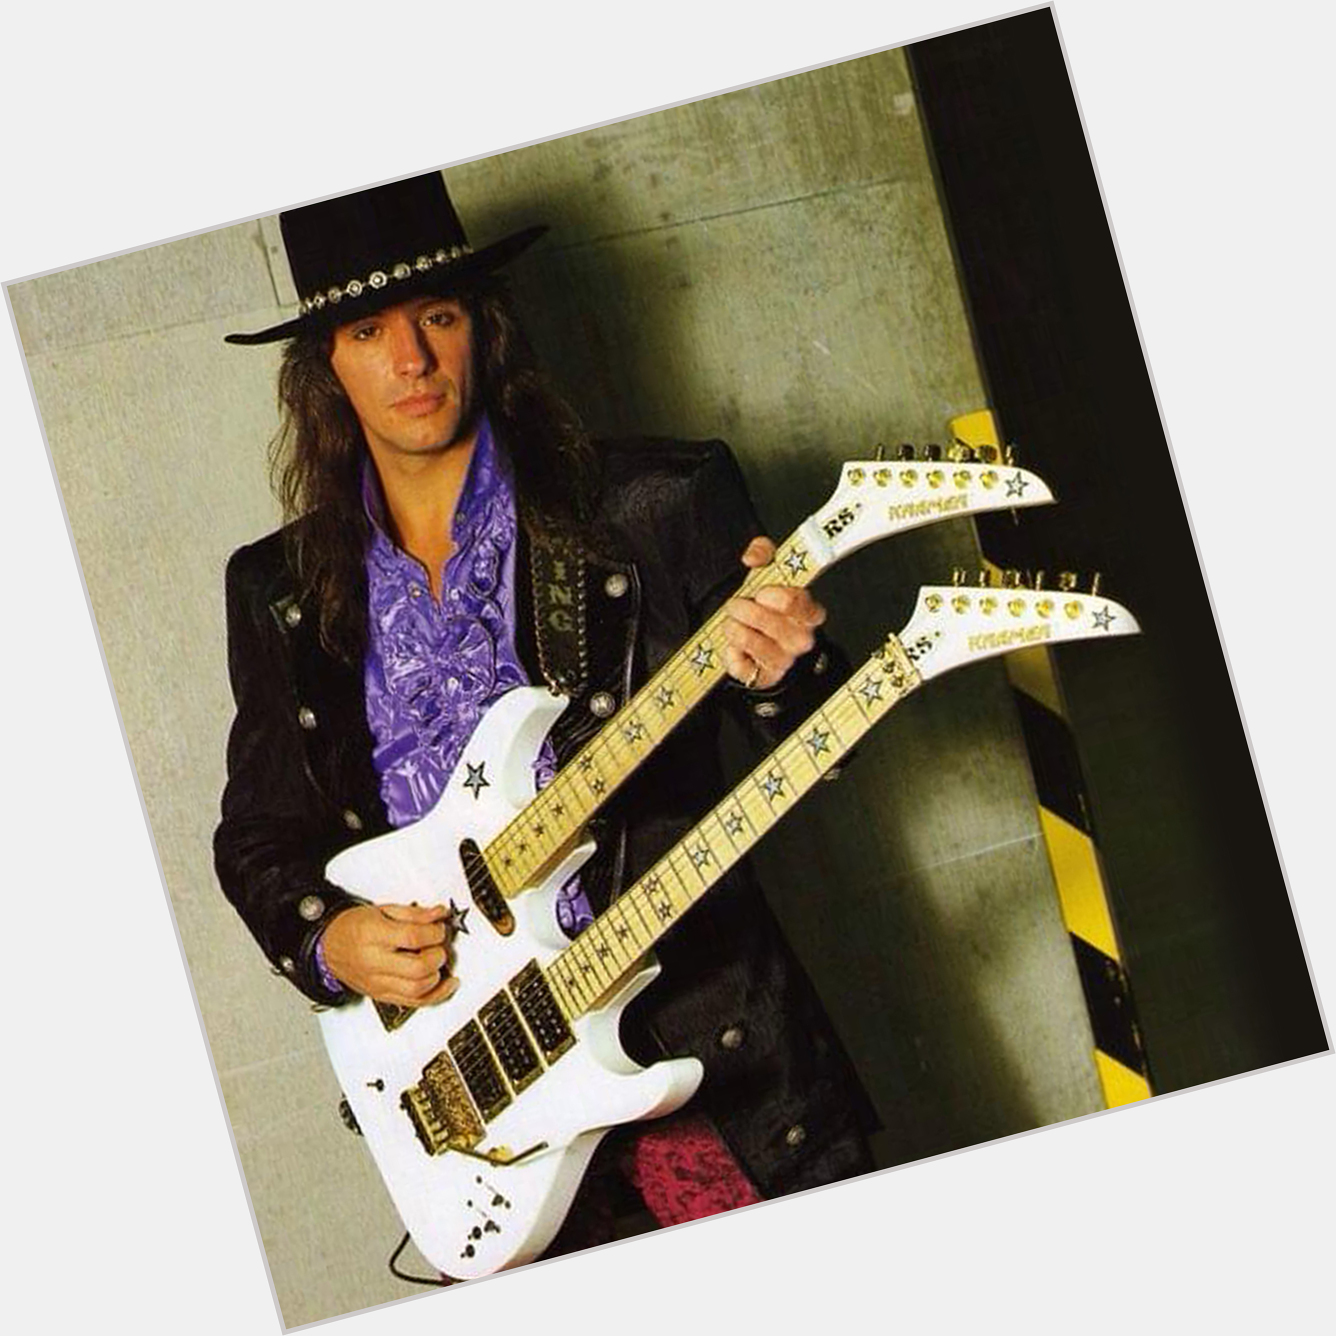 Happy Birthday, King of the Swing! Which Bon Jovi solo are you playing to celebrate the great Richie Sambora? 